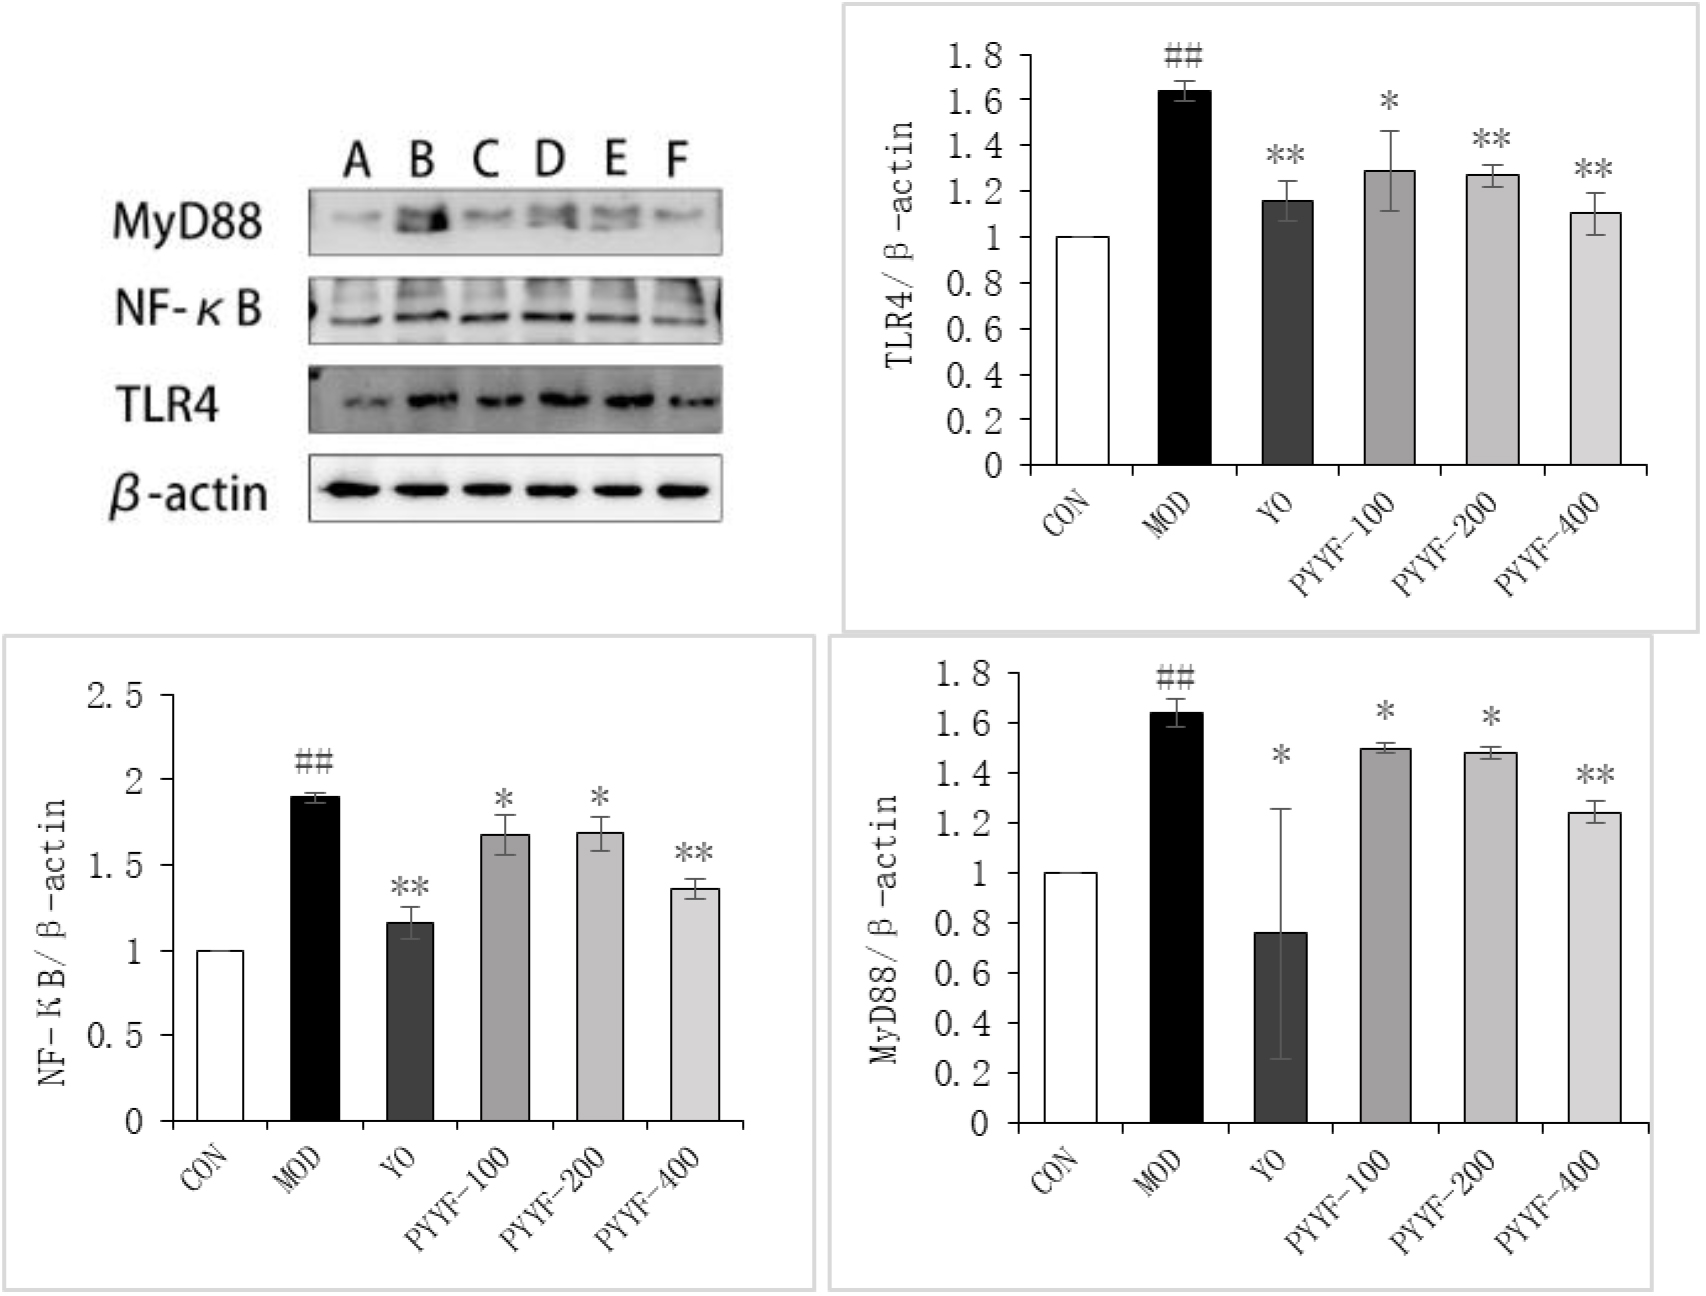 The effects of PTTF on the protein expression levels of TLR4, MyD88, and NF-κB in ankle joint tissues of double-model gout rats. Note: A: CON; B: MOD; C: YO; D: PTTF-L; E: PTTF-M; F: PTTF-H; CON: Blank group; MOD: Model group; YO: Colchicine group; PTTF-100: Prunus Tomentosa Total Flavones 100 mg/kg-Dose group; PTTF-200: Prunus Tomentosa Total Flavones 200 mg/kg-Dose group; PTTF-400: Prunus Tomentosa Total Flavones 400 mg/kg-Dose group. Compared to the blank group, #: P< 0.05; ##: P< 0.01. Compared to the model group, *: P< 0.05; **: P< 0.01.